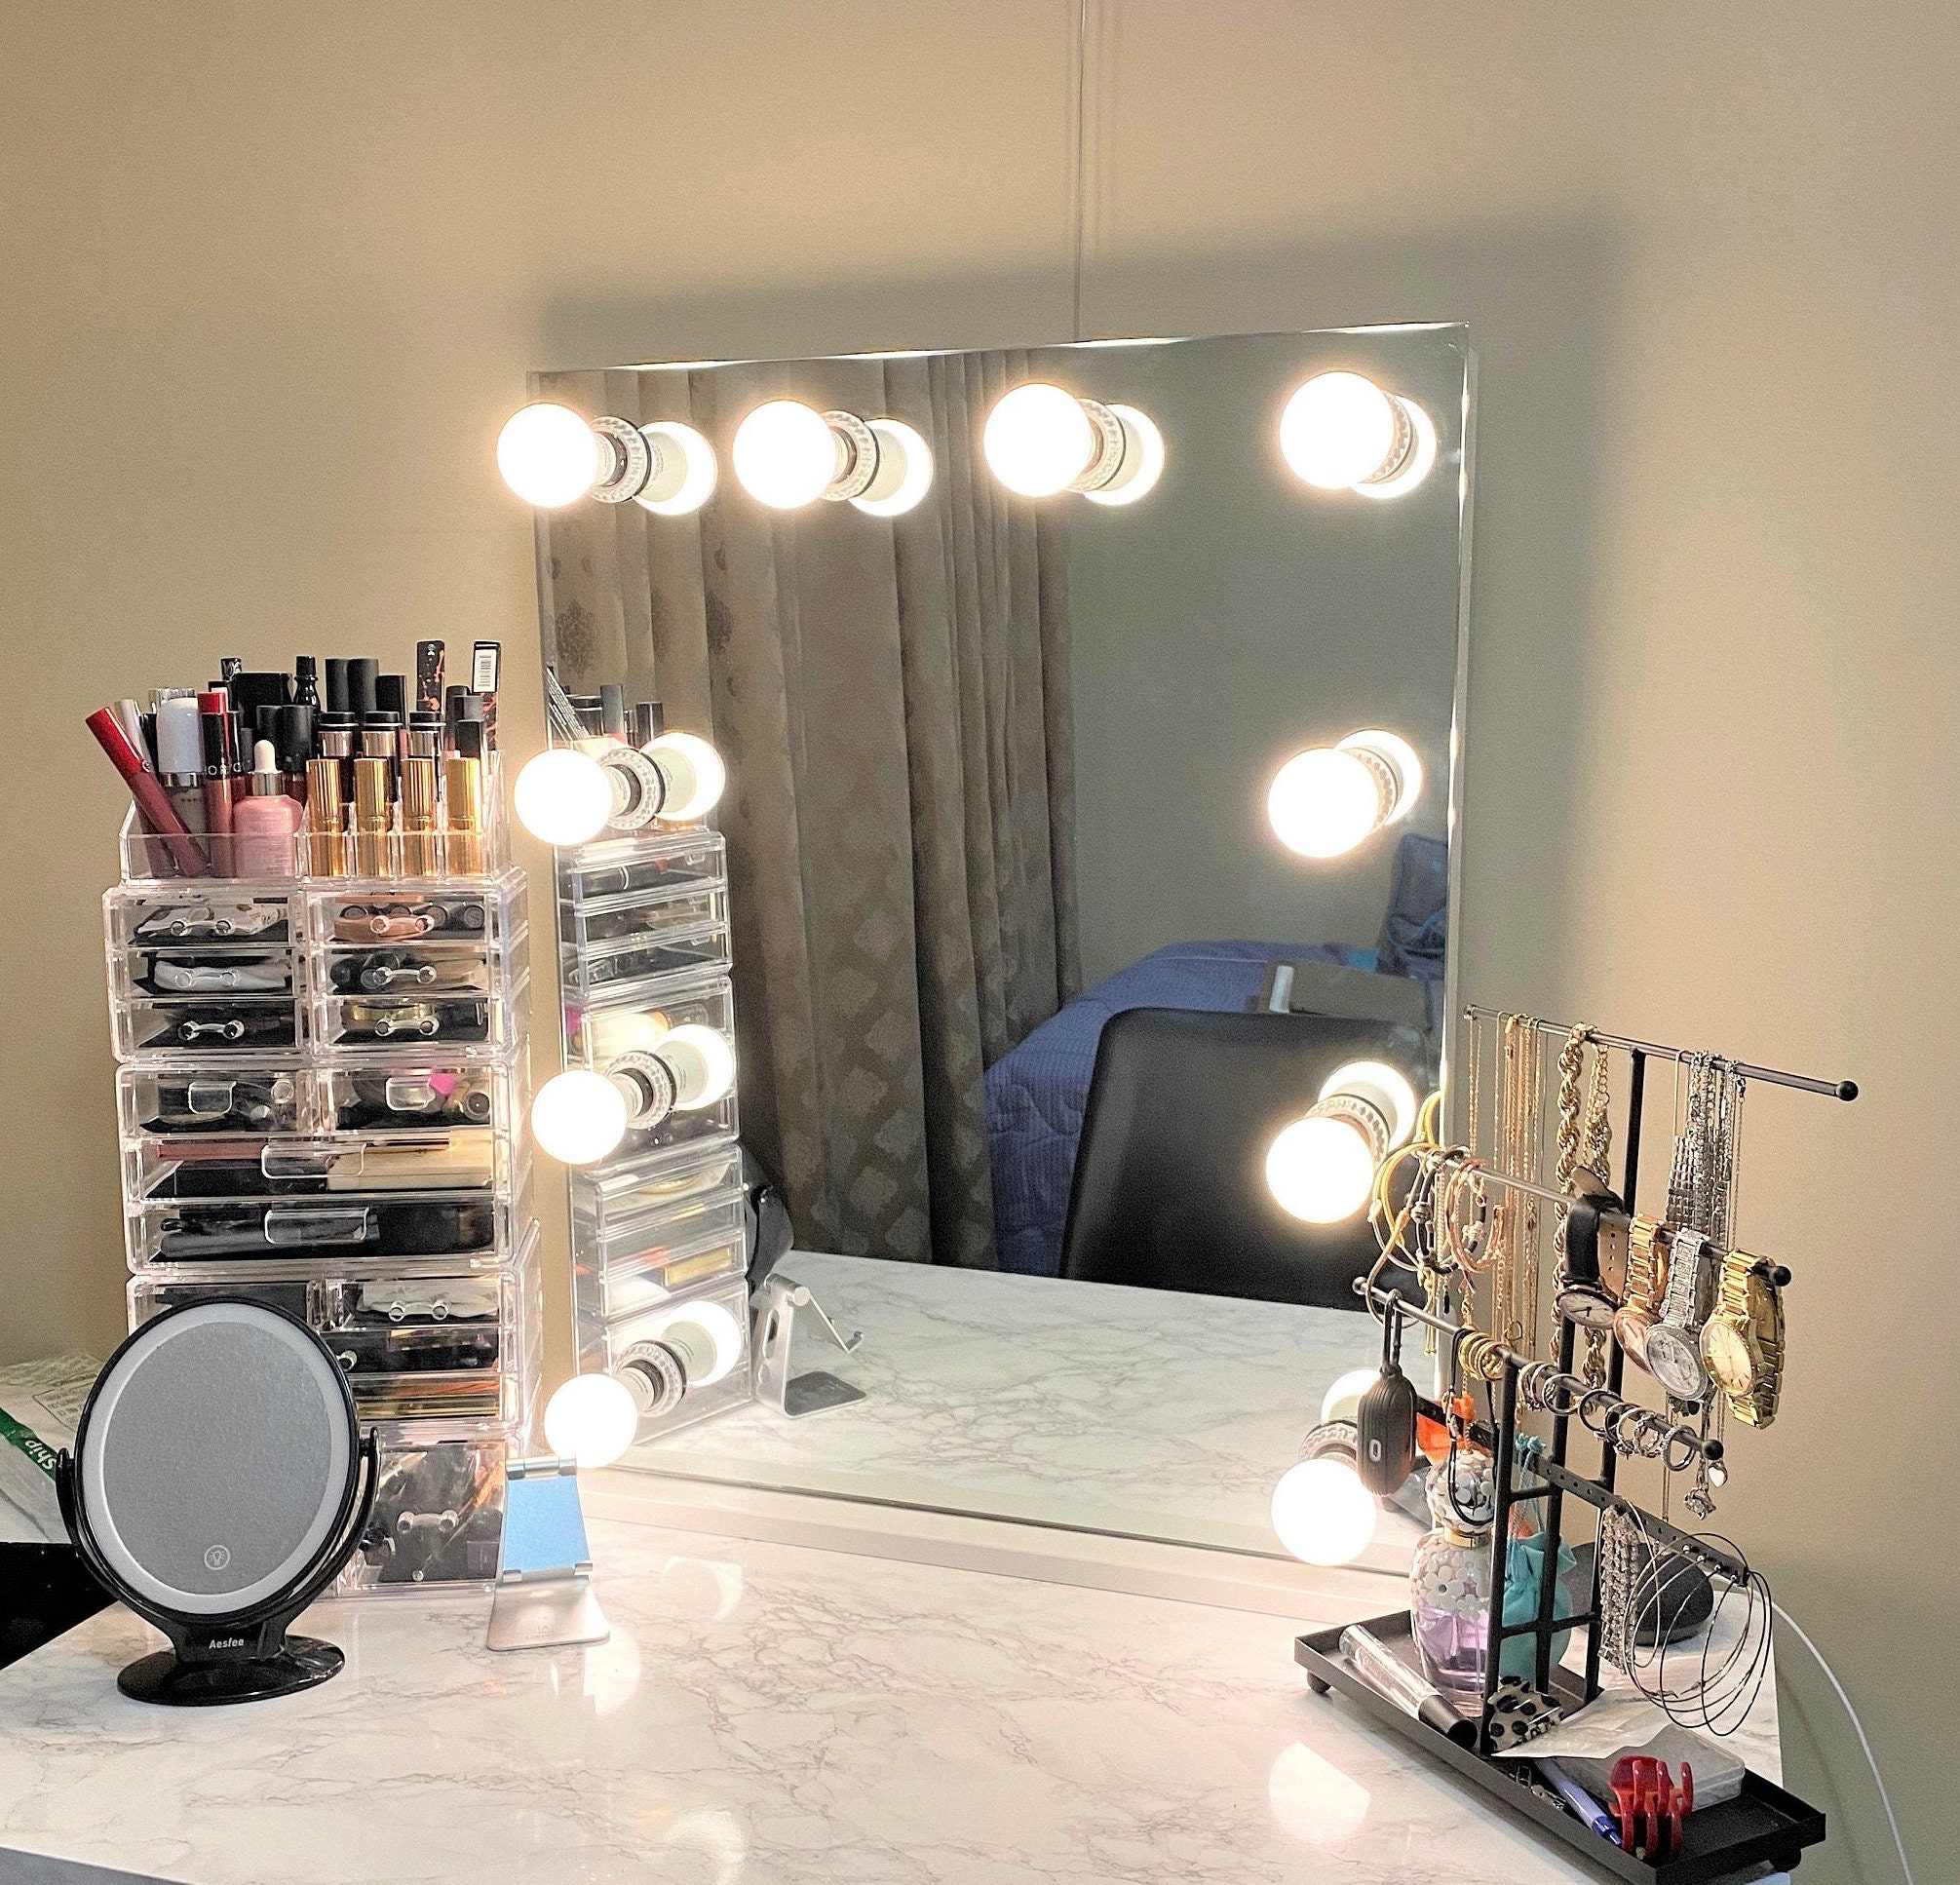 Large Frameless Vanity Mirror With Lights and Mirror Desk 32 X 27 